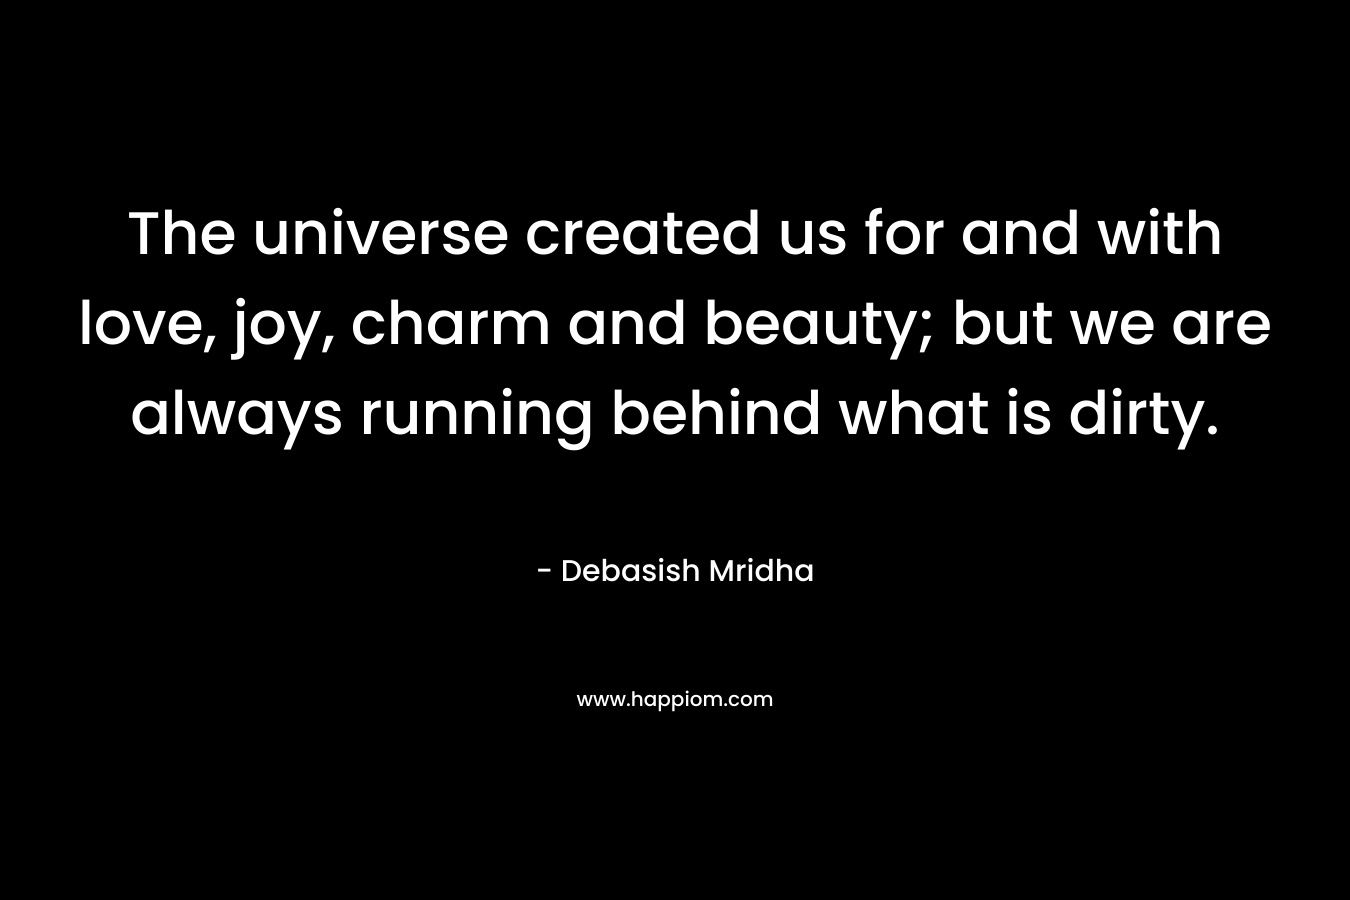 The universe created us for and with love, joy, charm and beauty; but we are always running behind what is dirty.